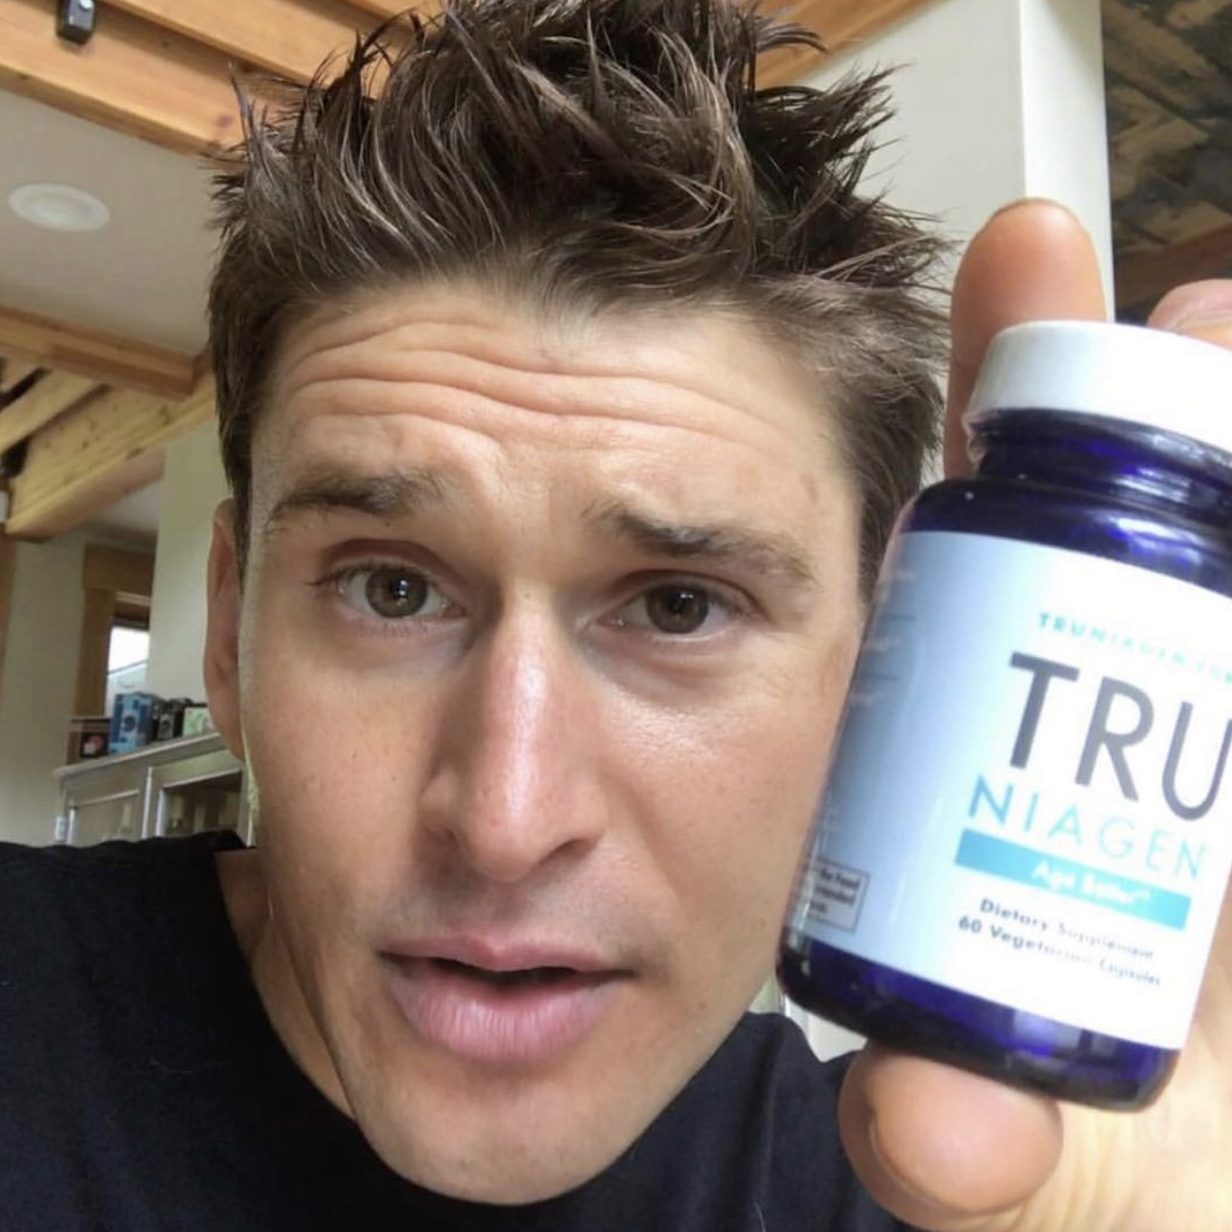 Male influencer holding bottle of nutraceutical product next to his face